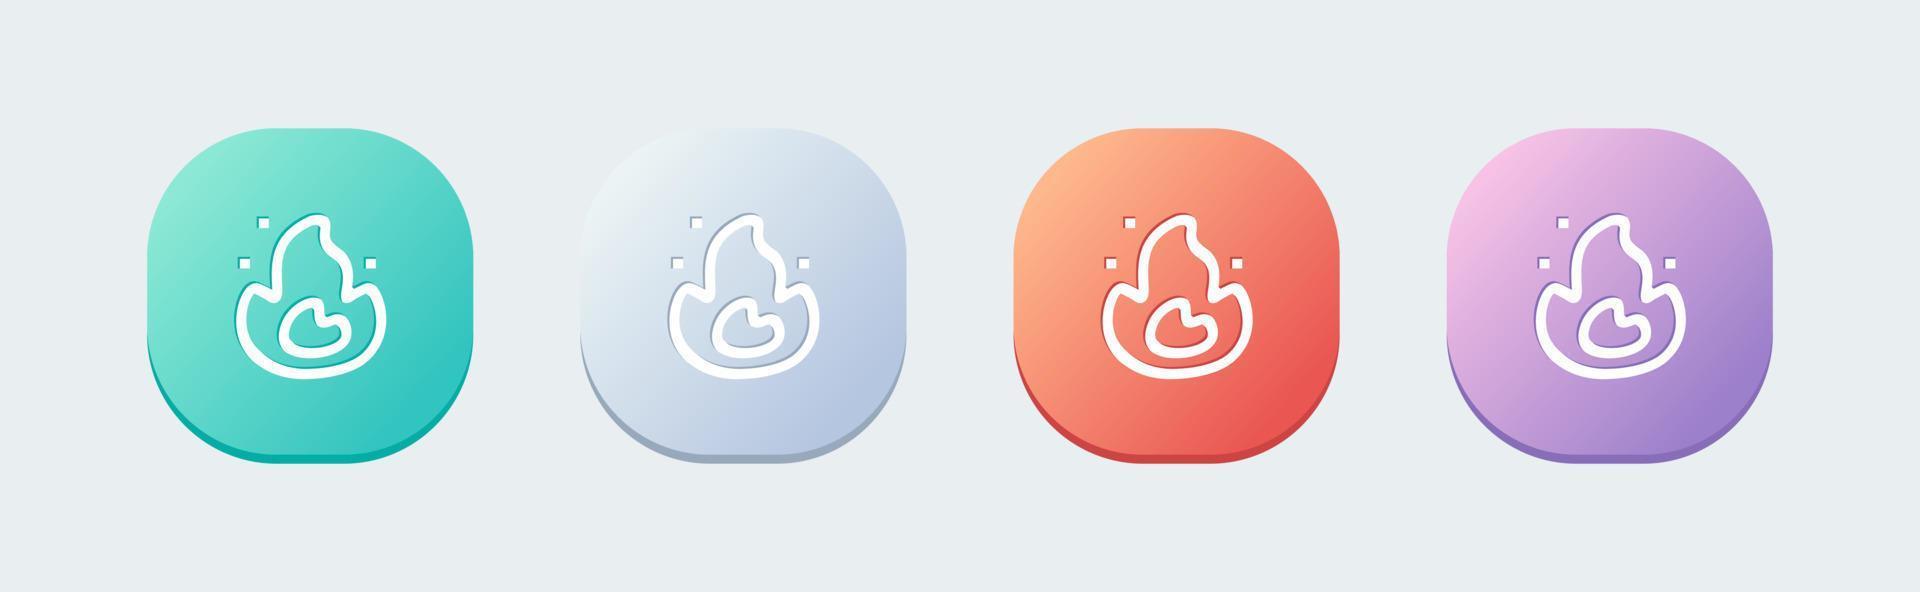 Fire line icon in flat design style. Flame signs vector illustration.